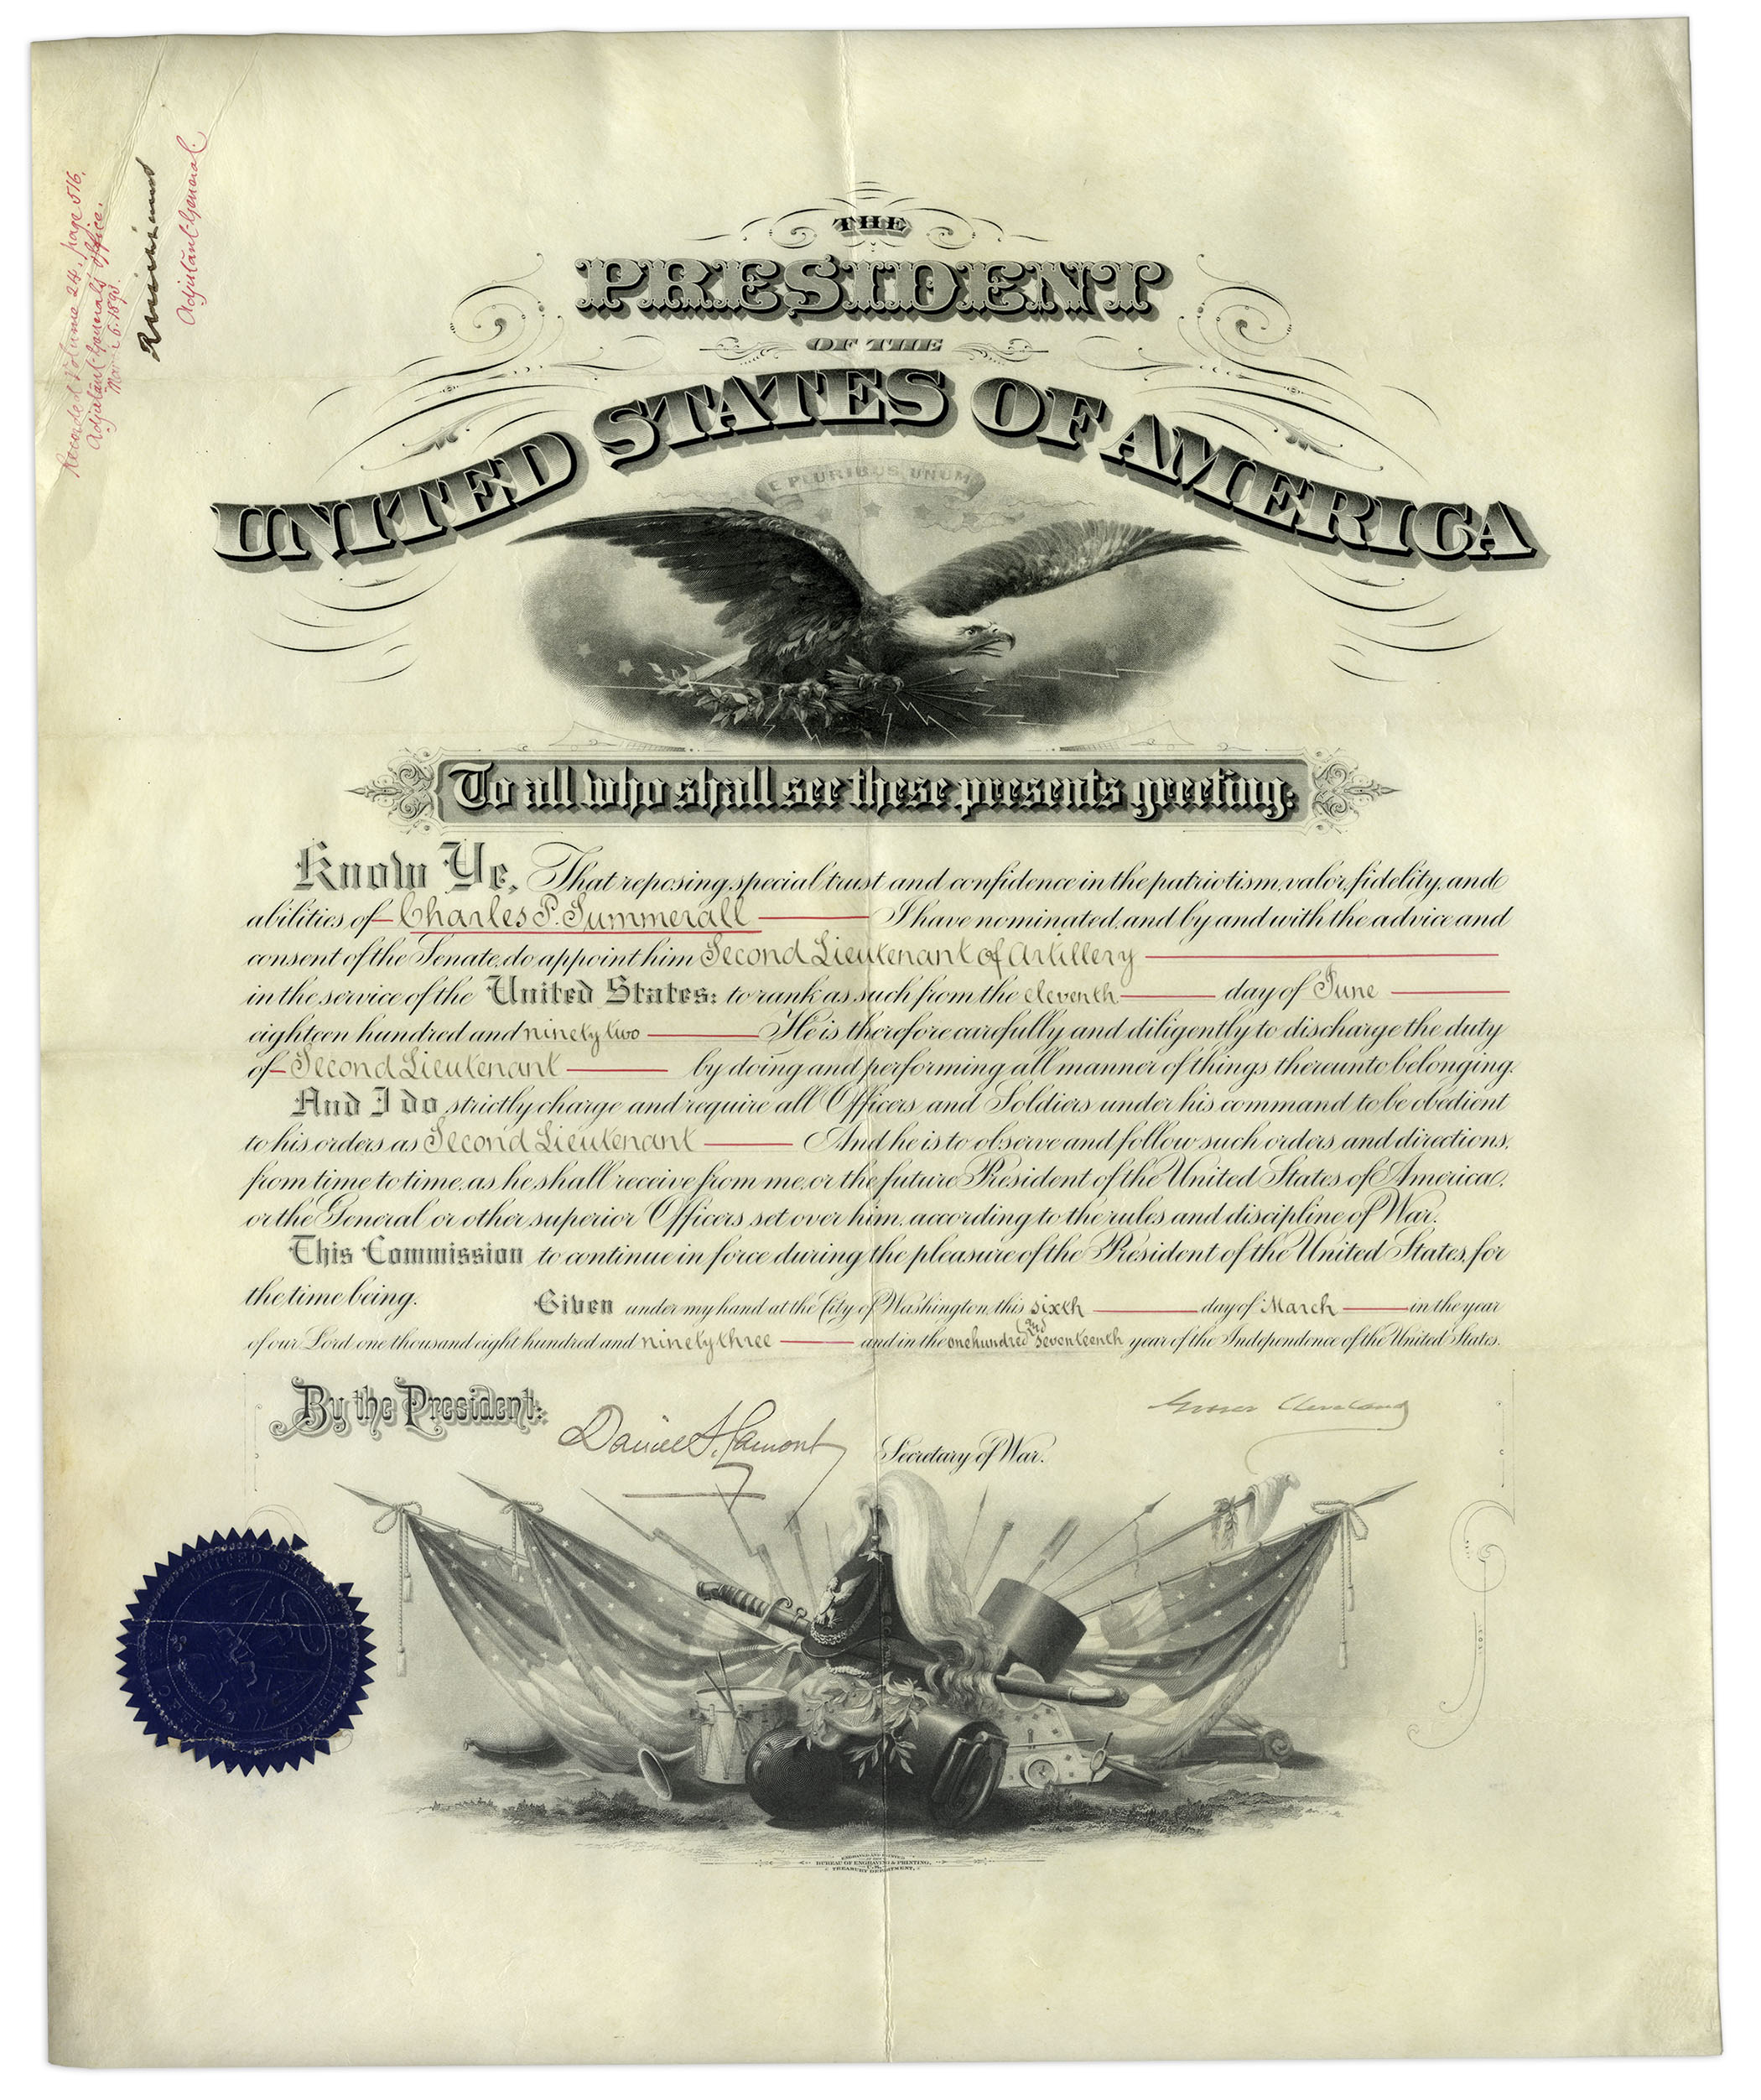 Grover Cleveland Signed Military Appointment as President Grover Cleveland military appointment - Image 2 of 3